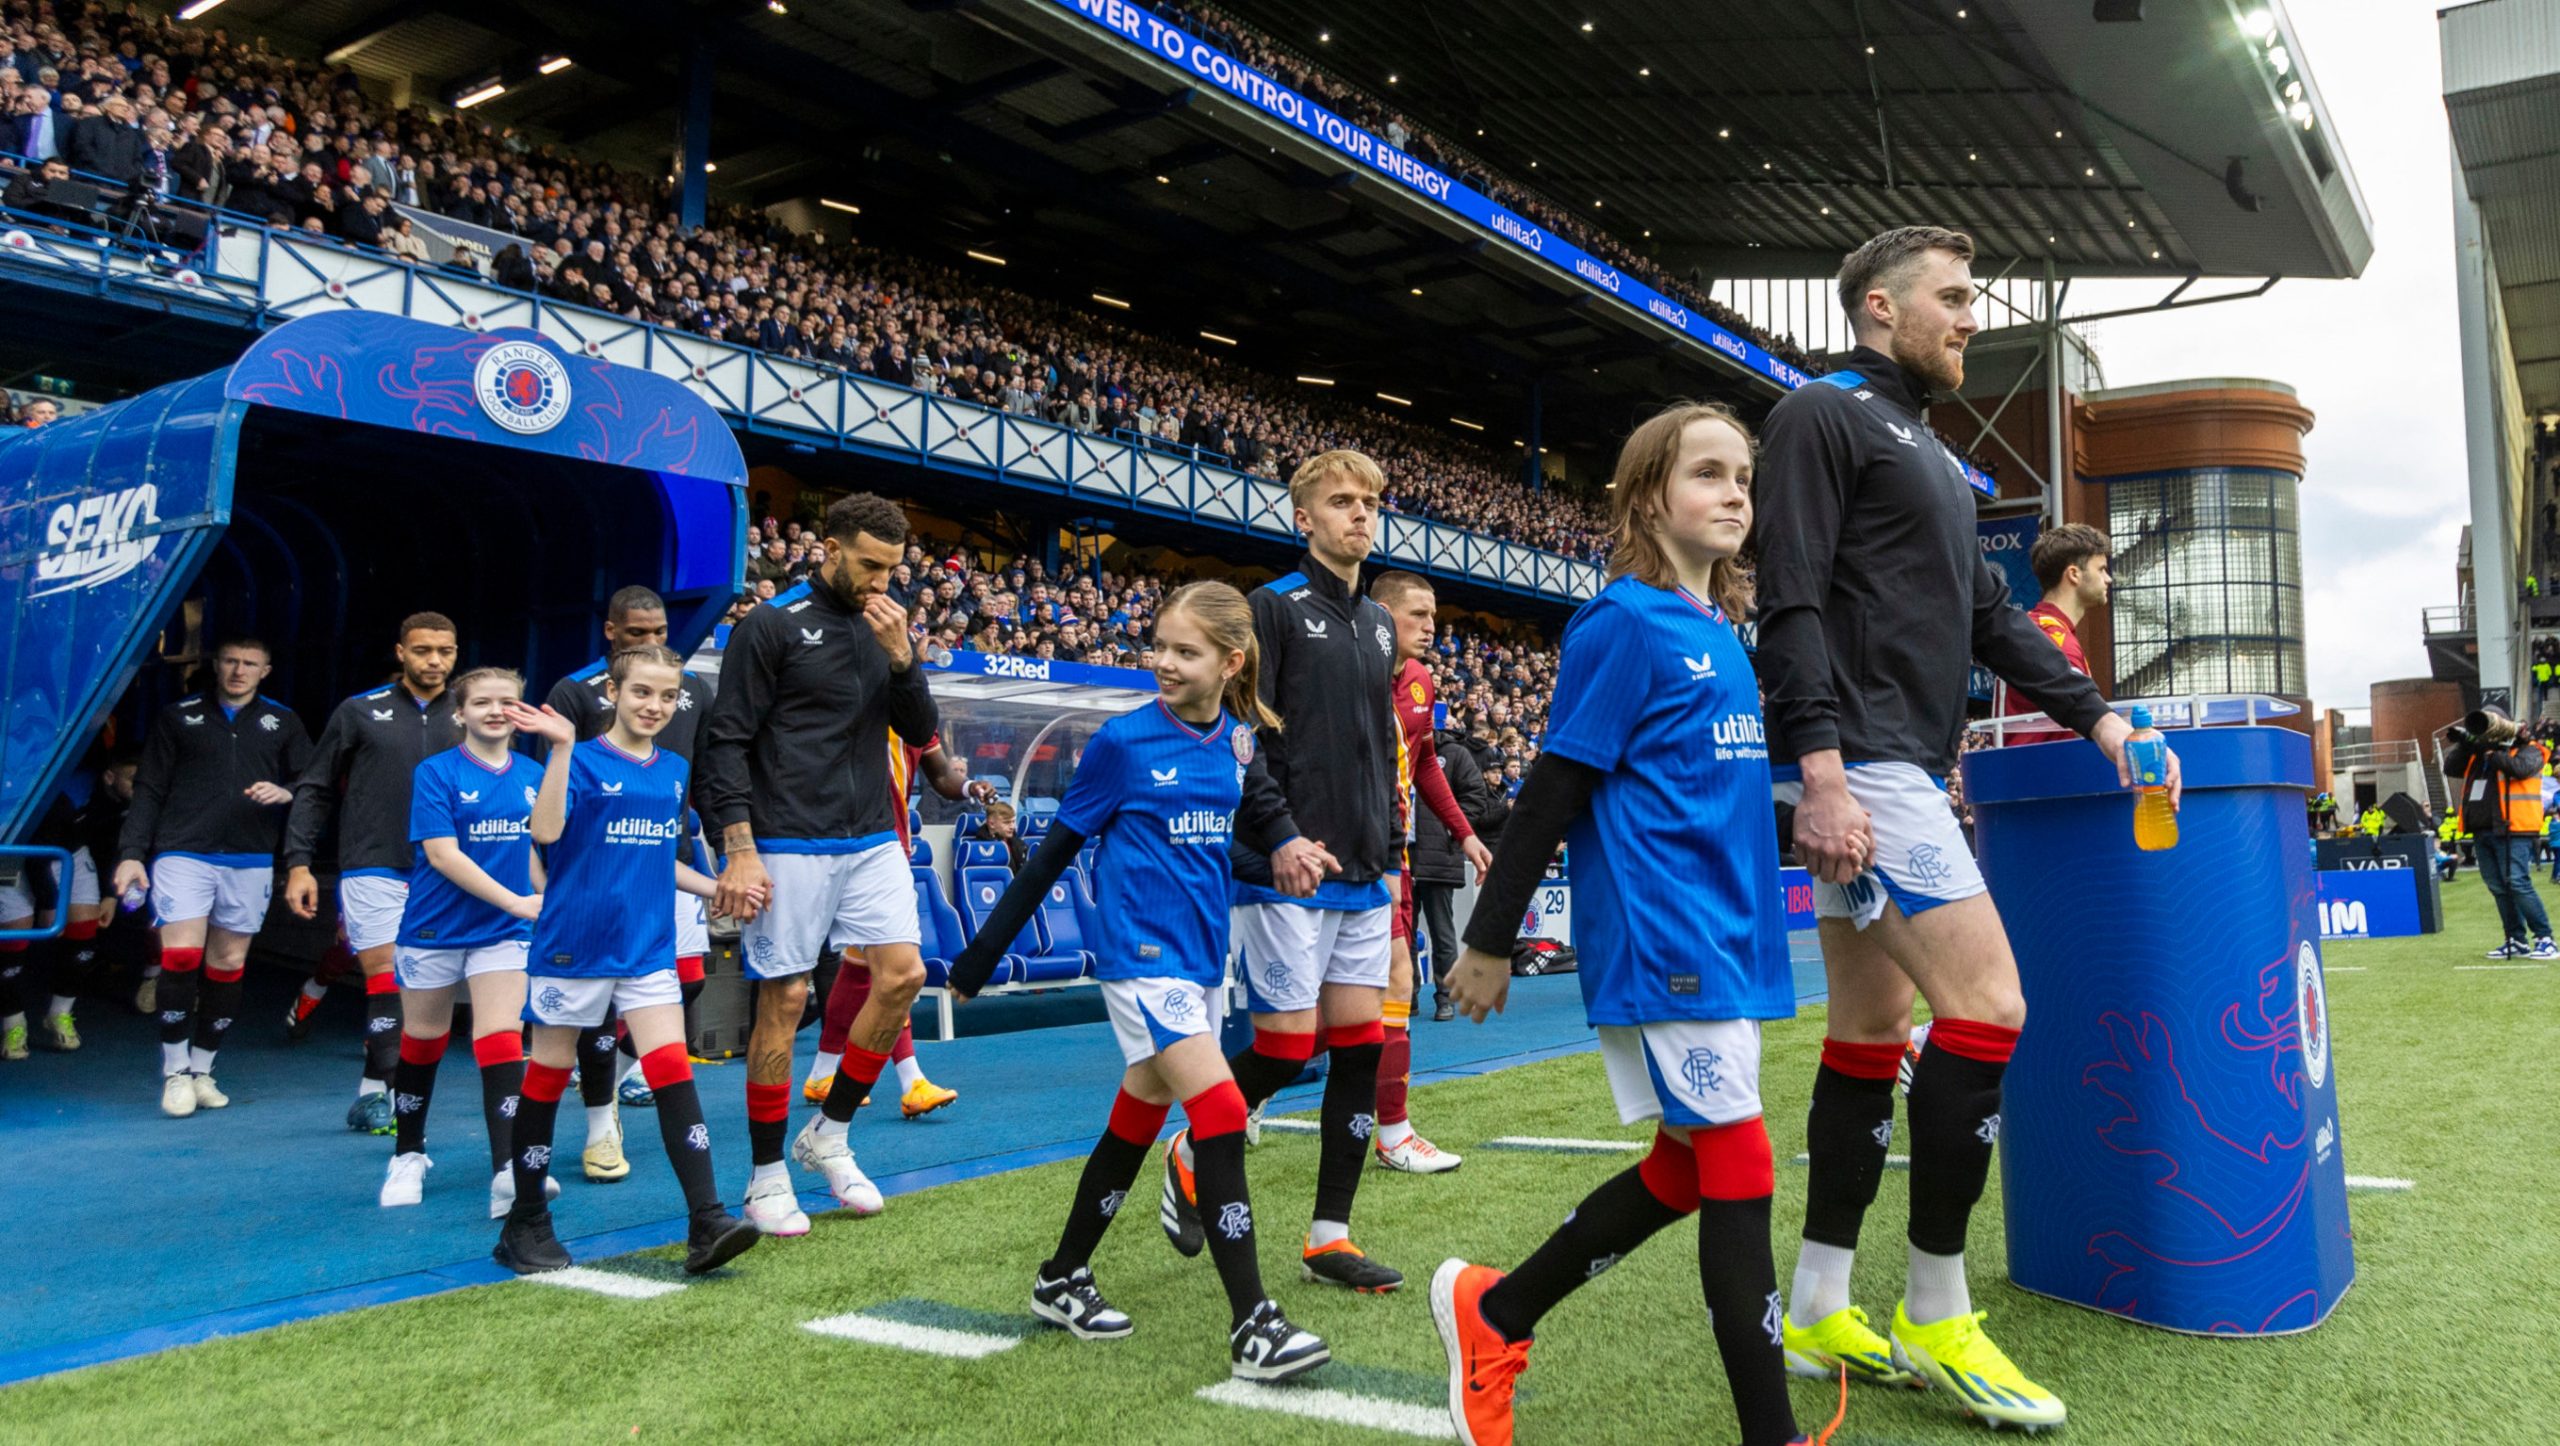 Children of fallen heroes lead teams out at Ibrox